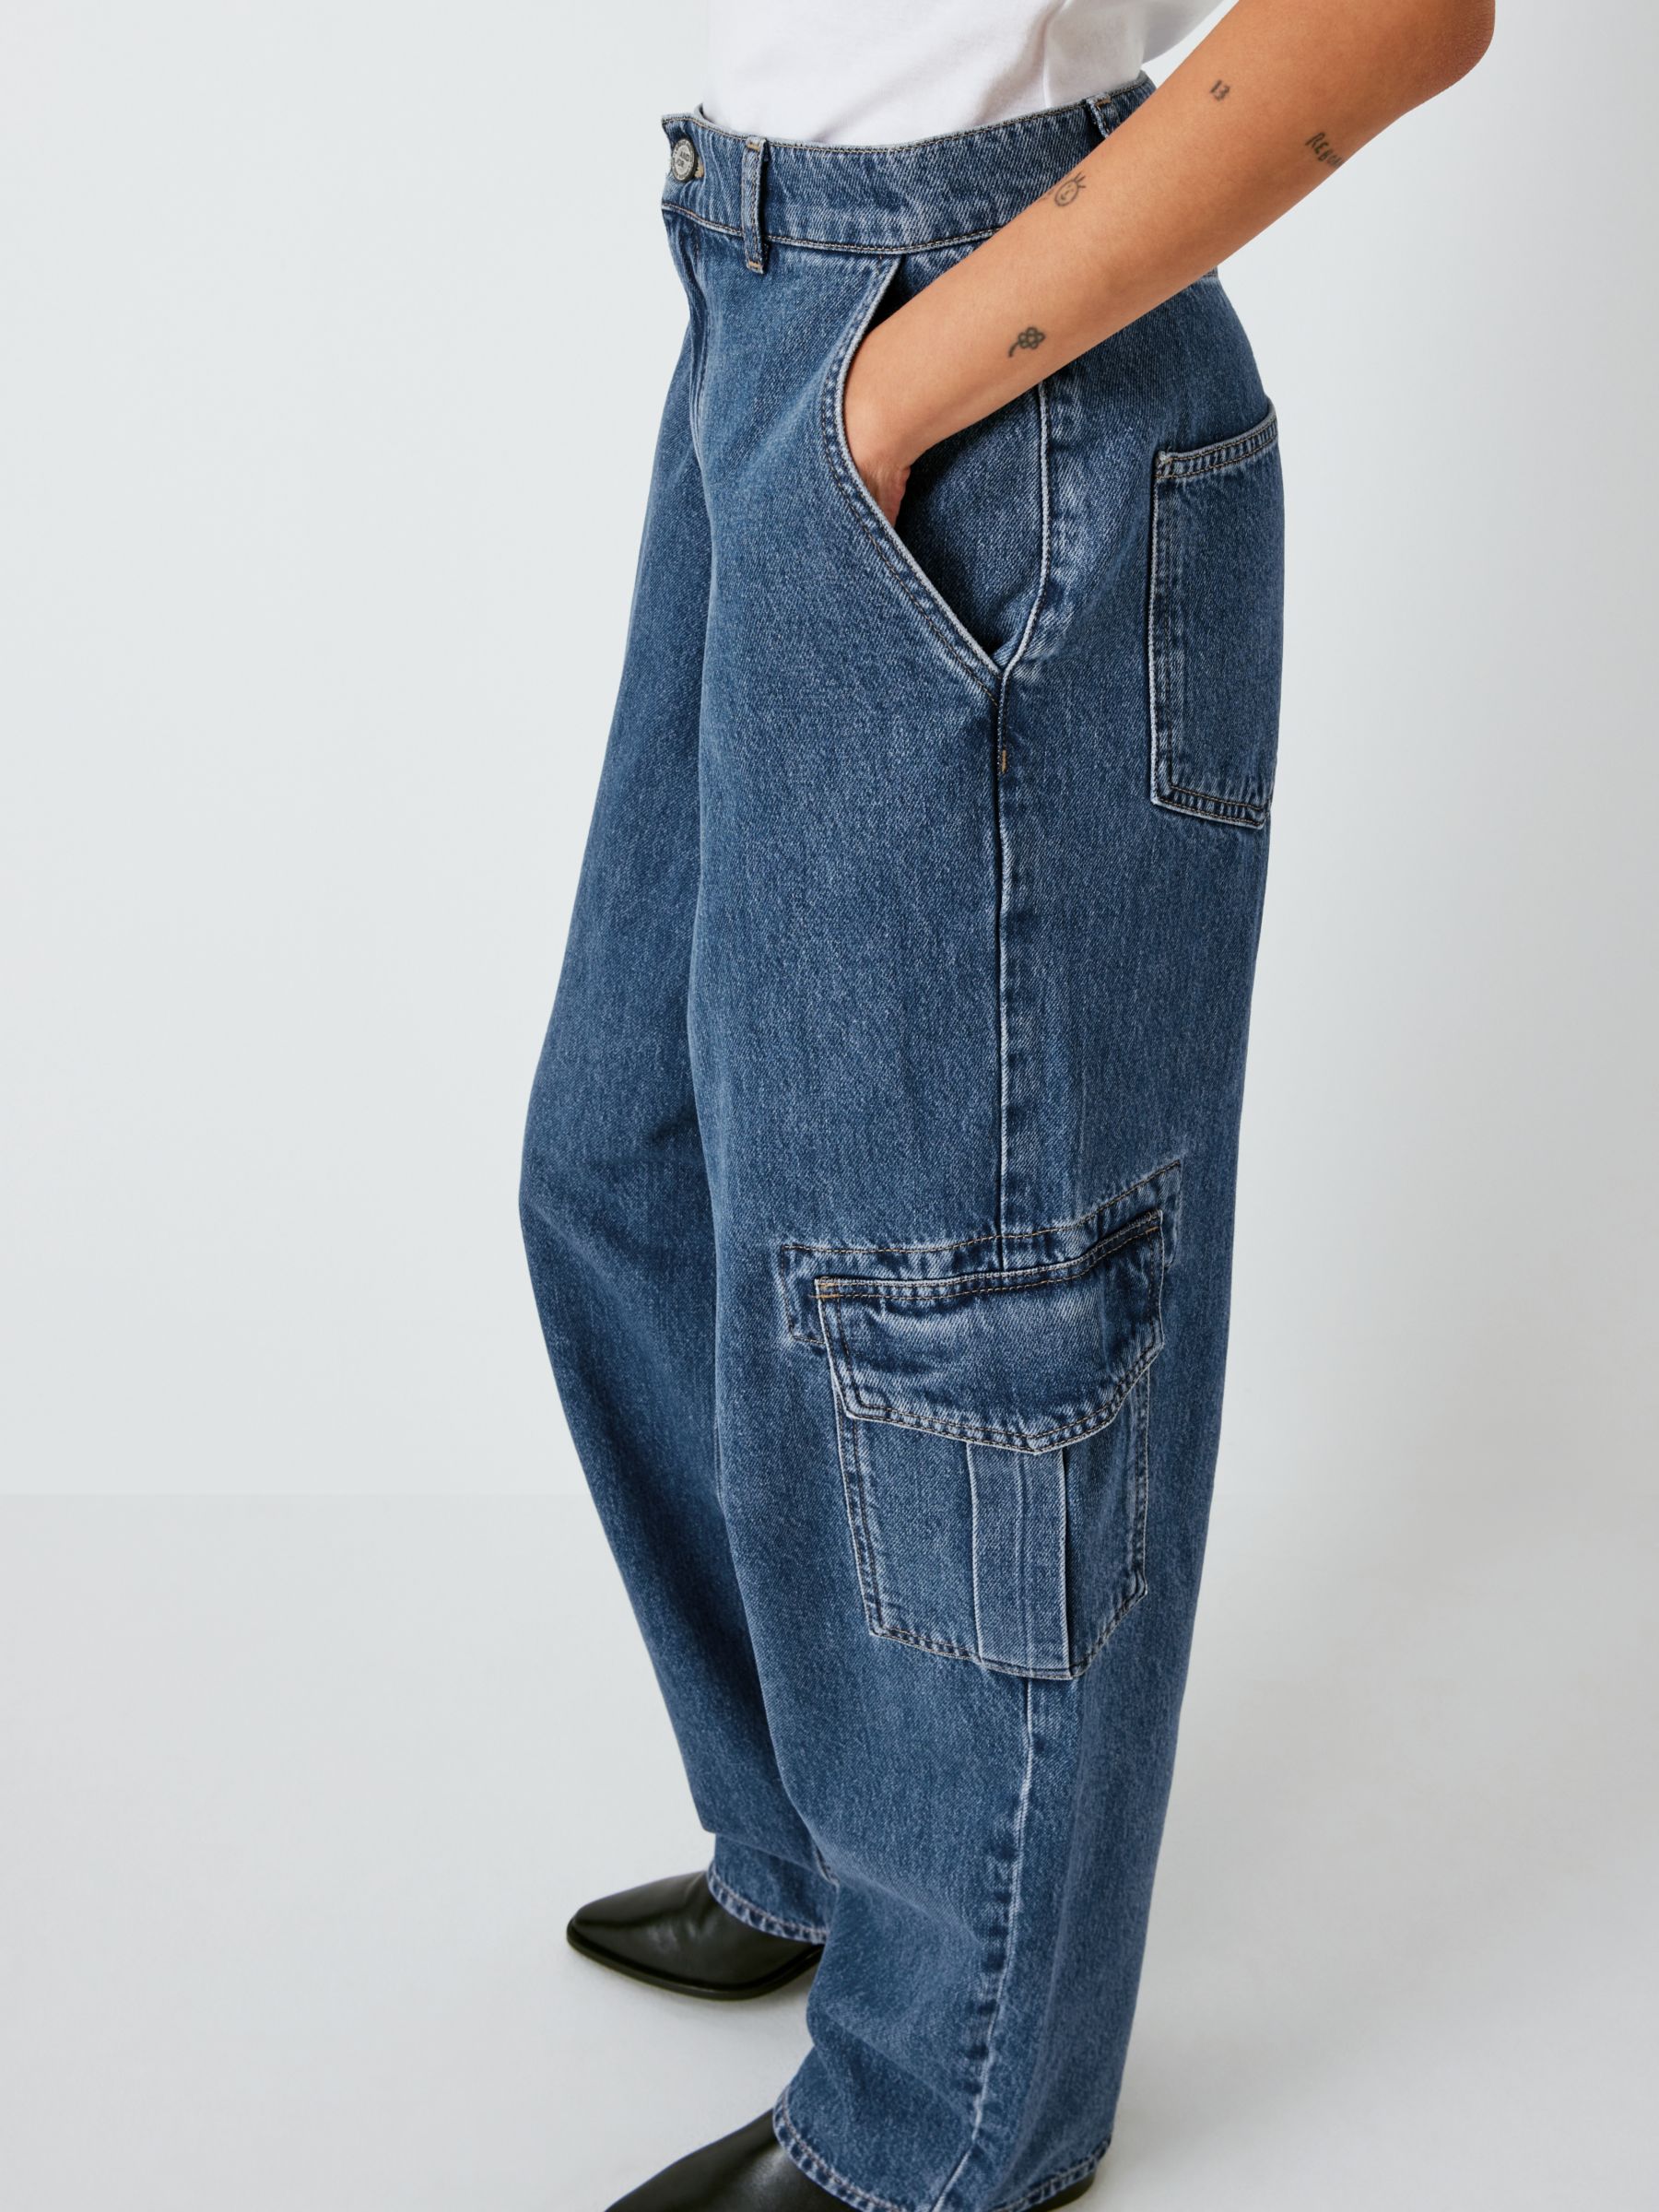 AND/OR Culver Cargo Jeans, Mid Blue Wash